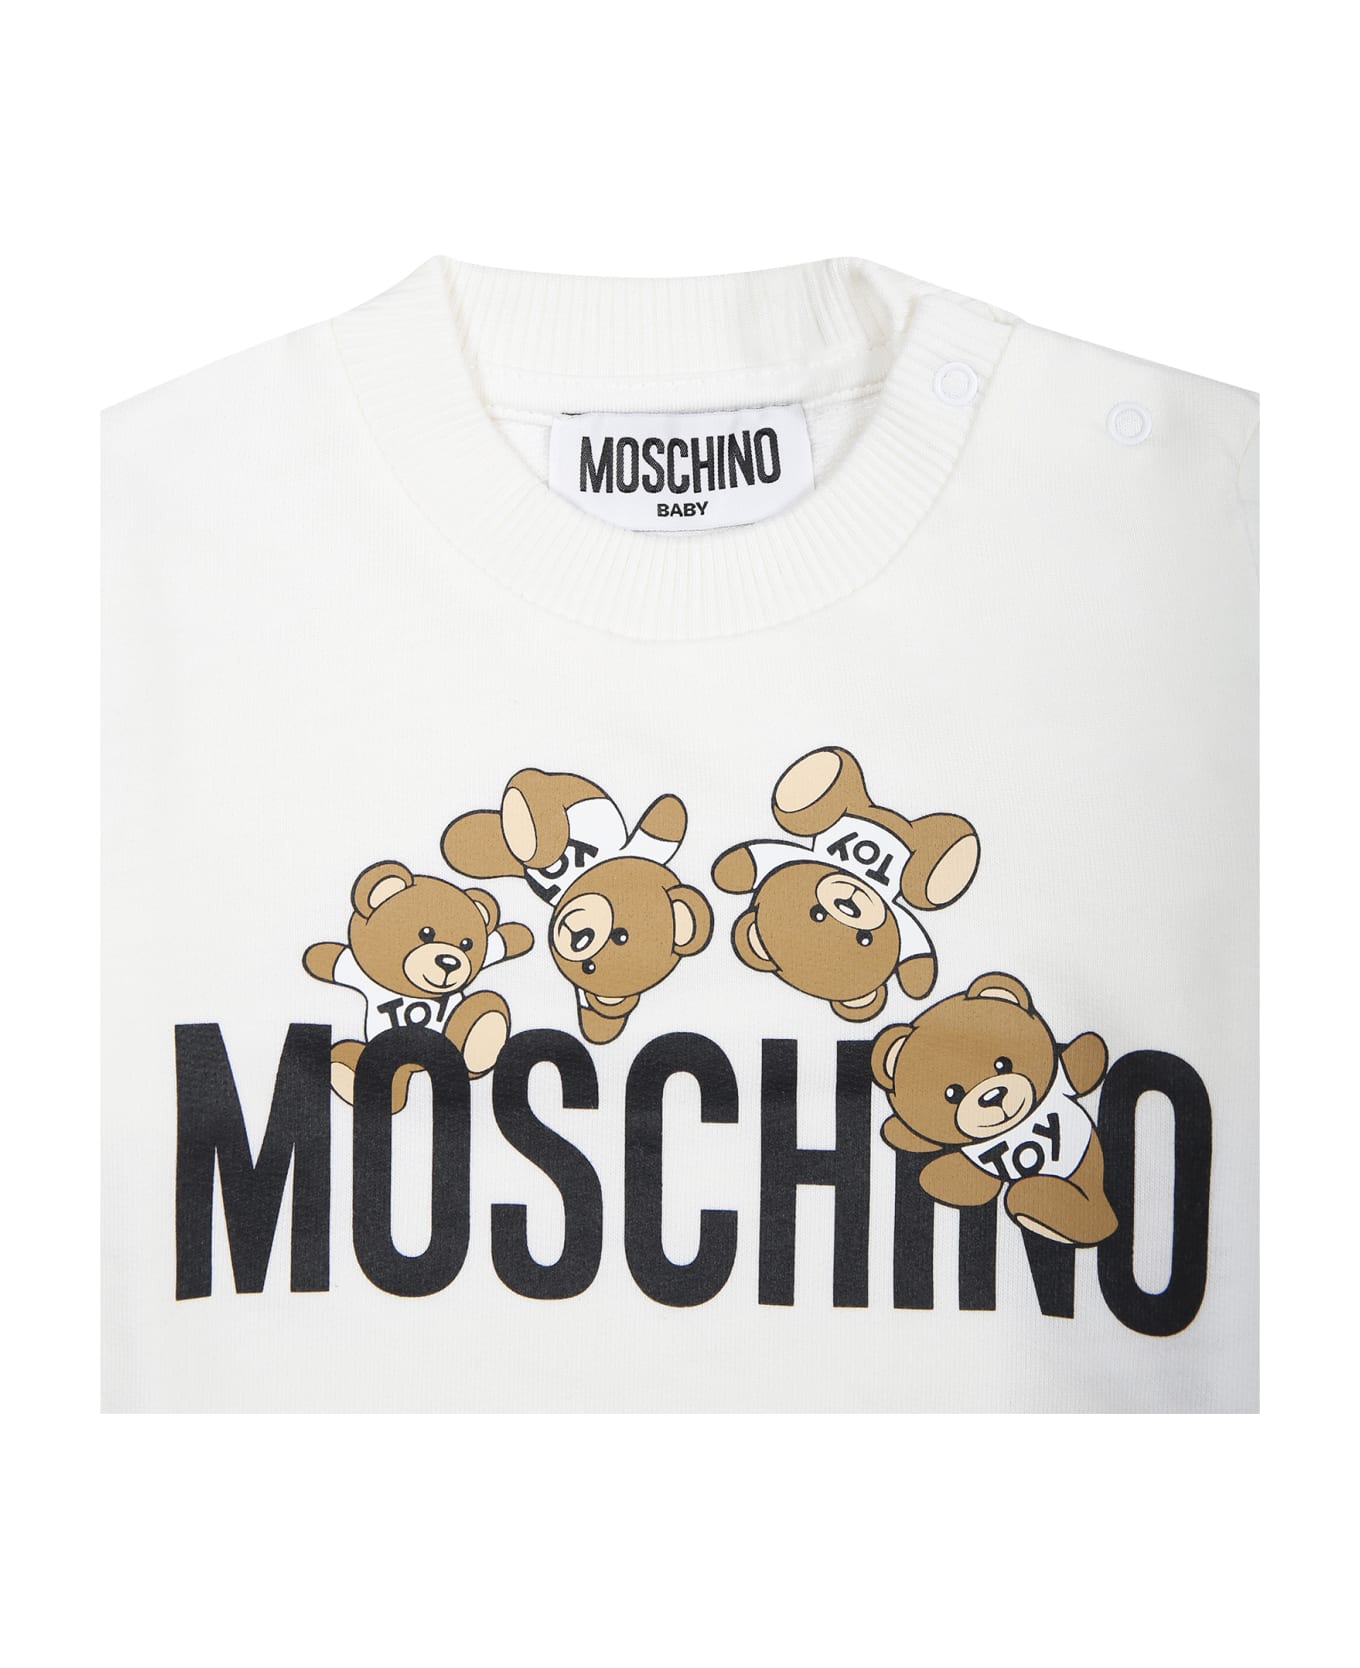 Moschino White Sweatshirt For Babies With Teddy Bears And Logo - White